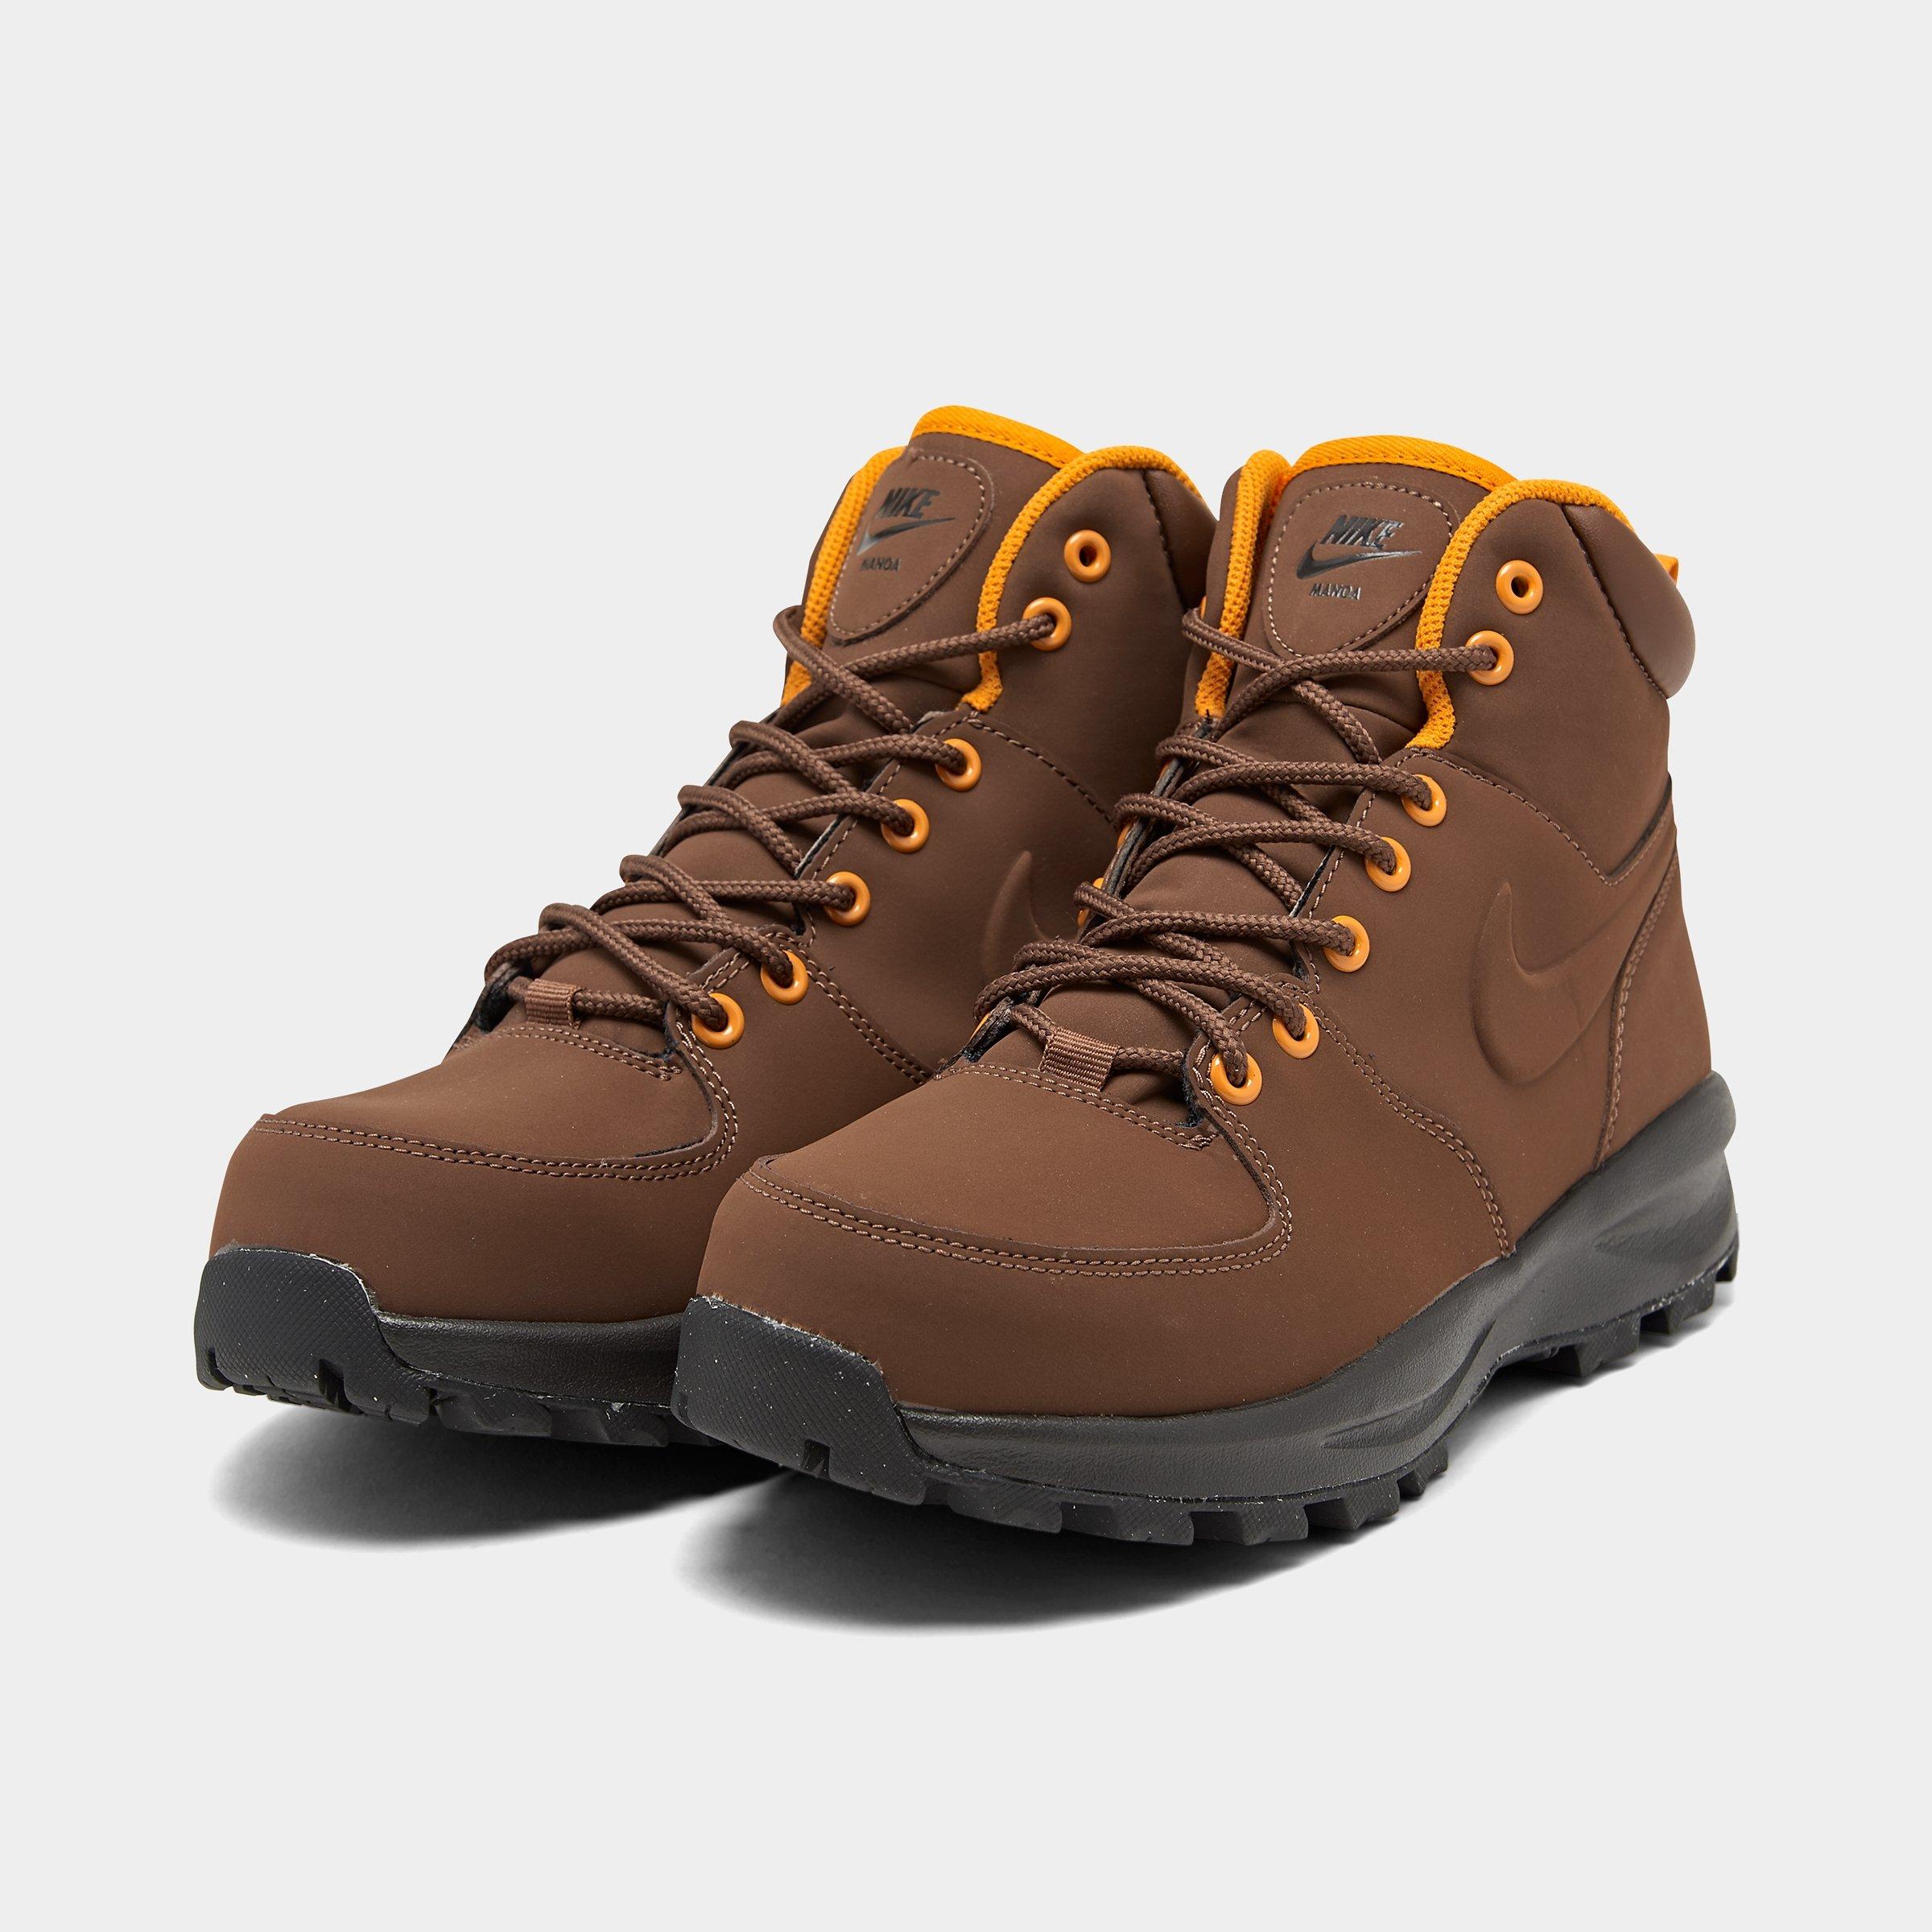 men's nike manoa leather boots